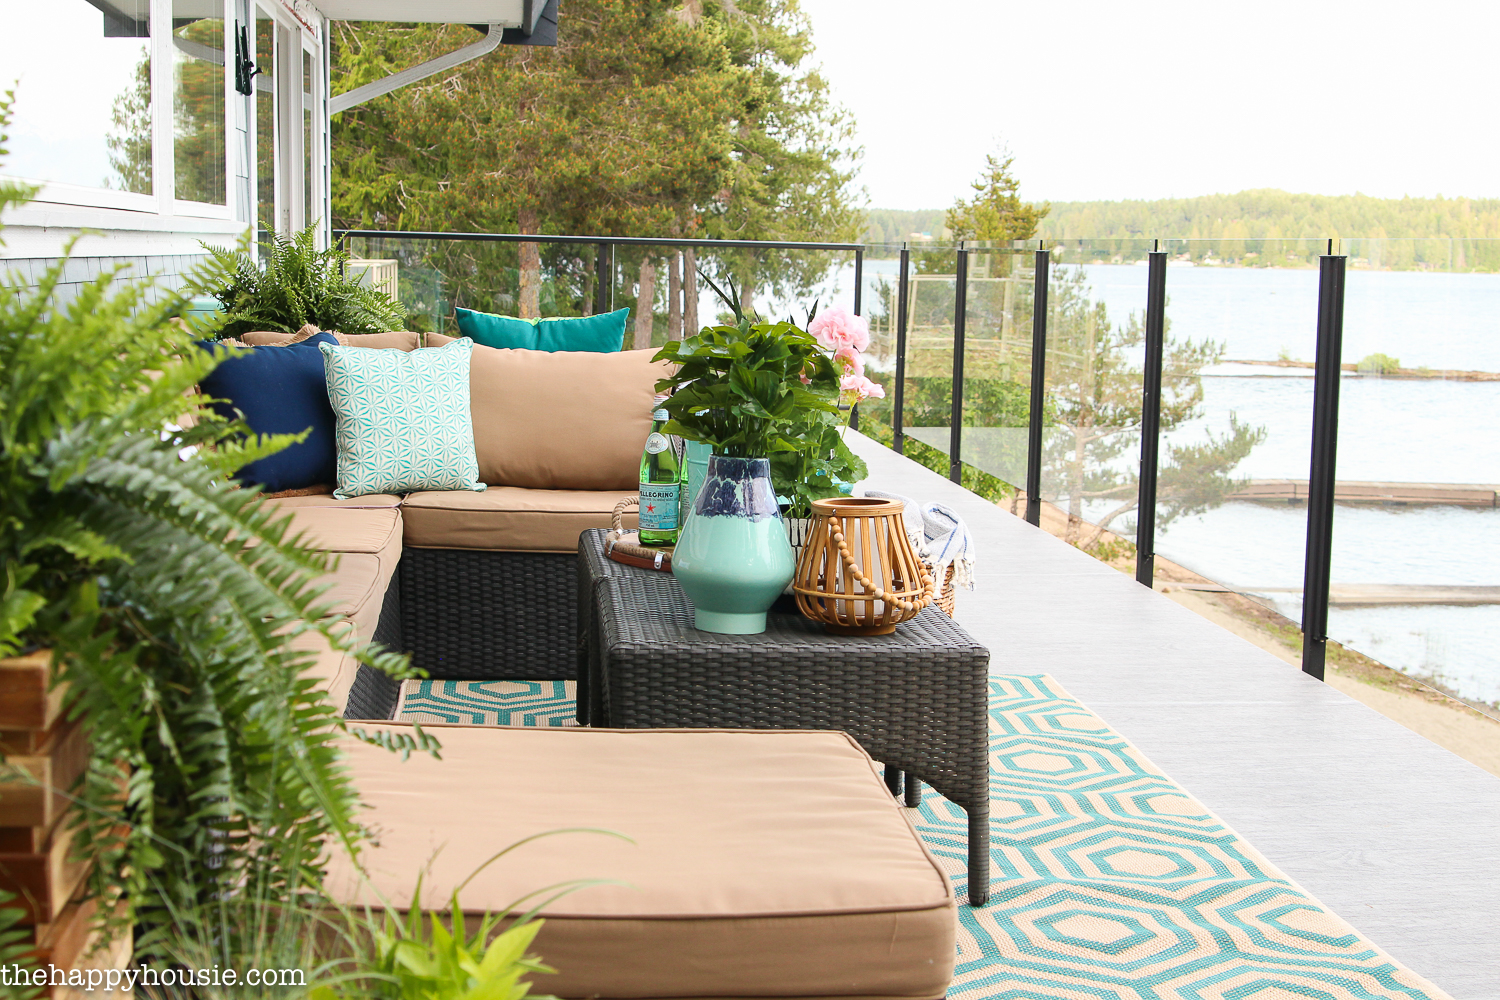 Sectional seating on the porch overlooking the lake.